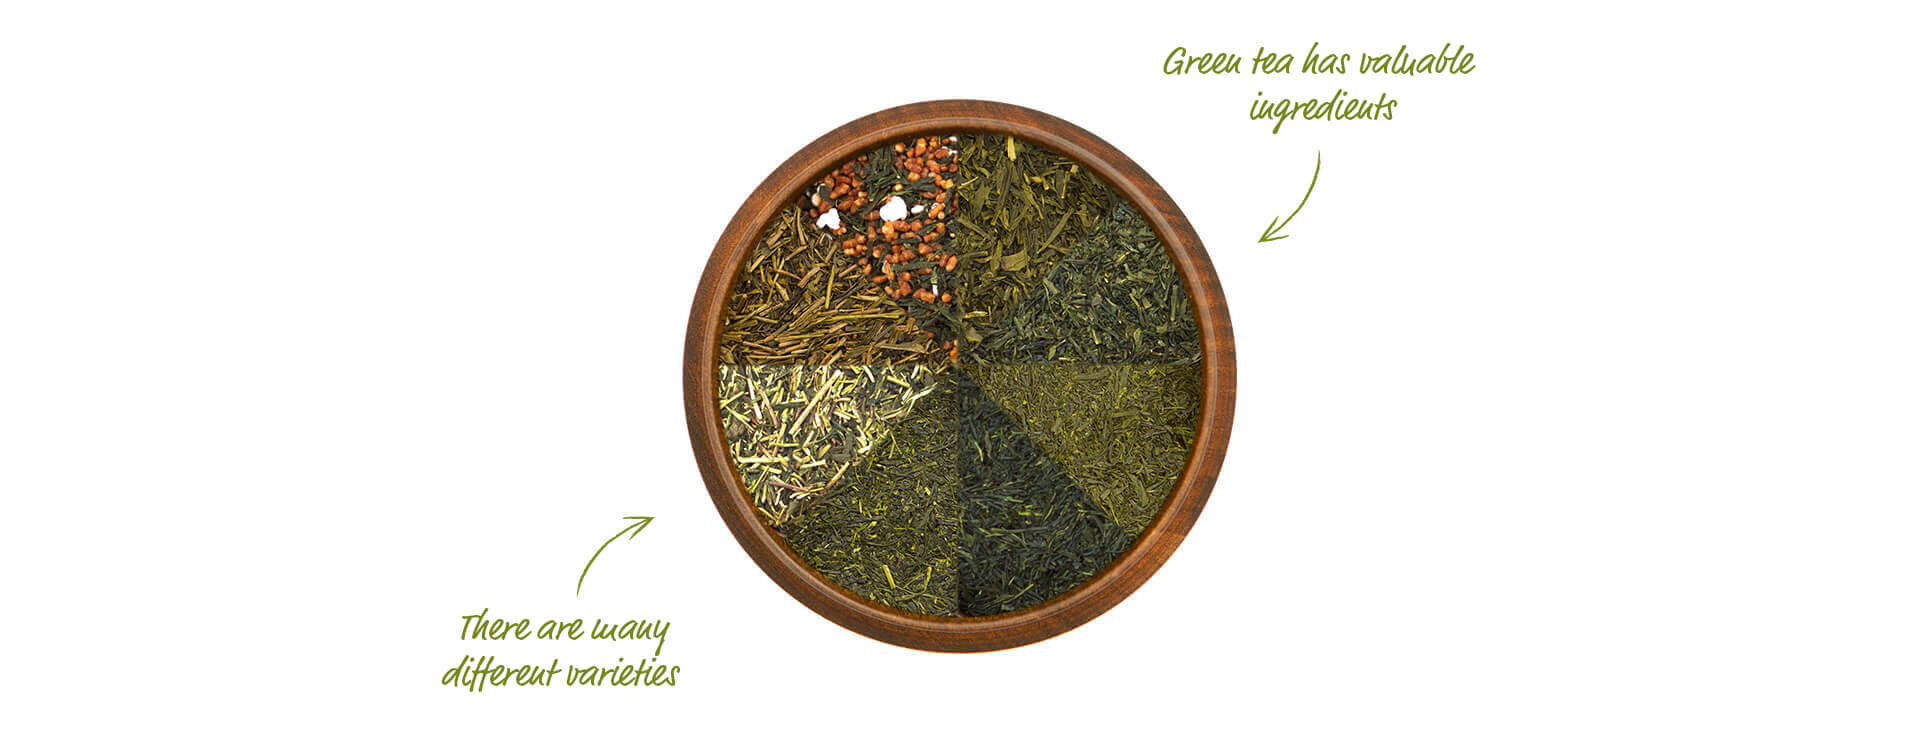 Preparation of different types of green tea